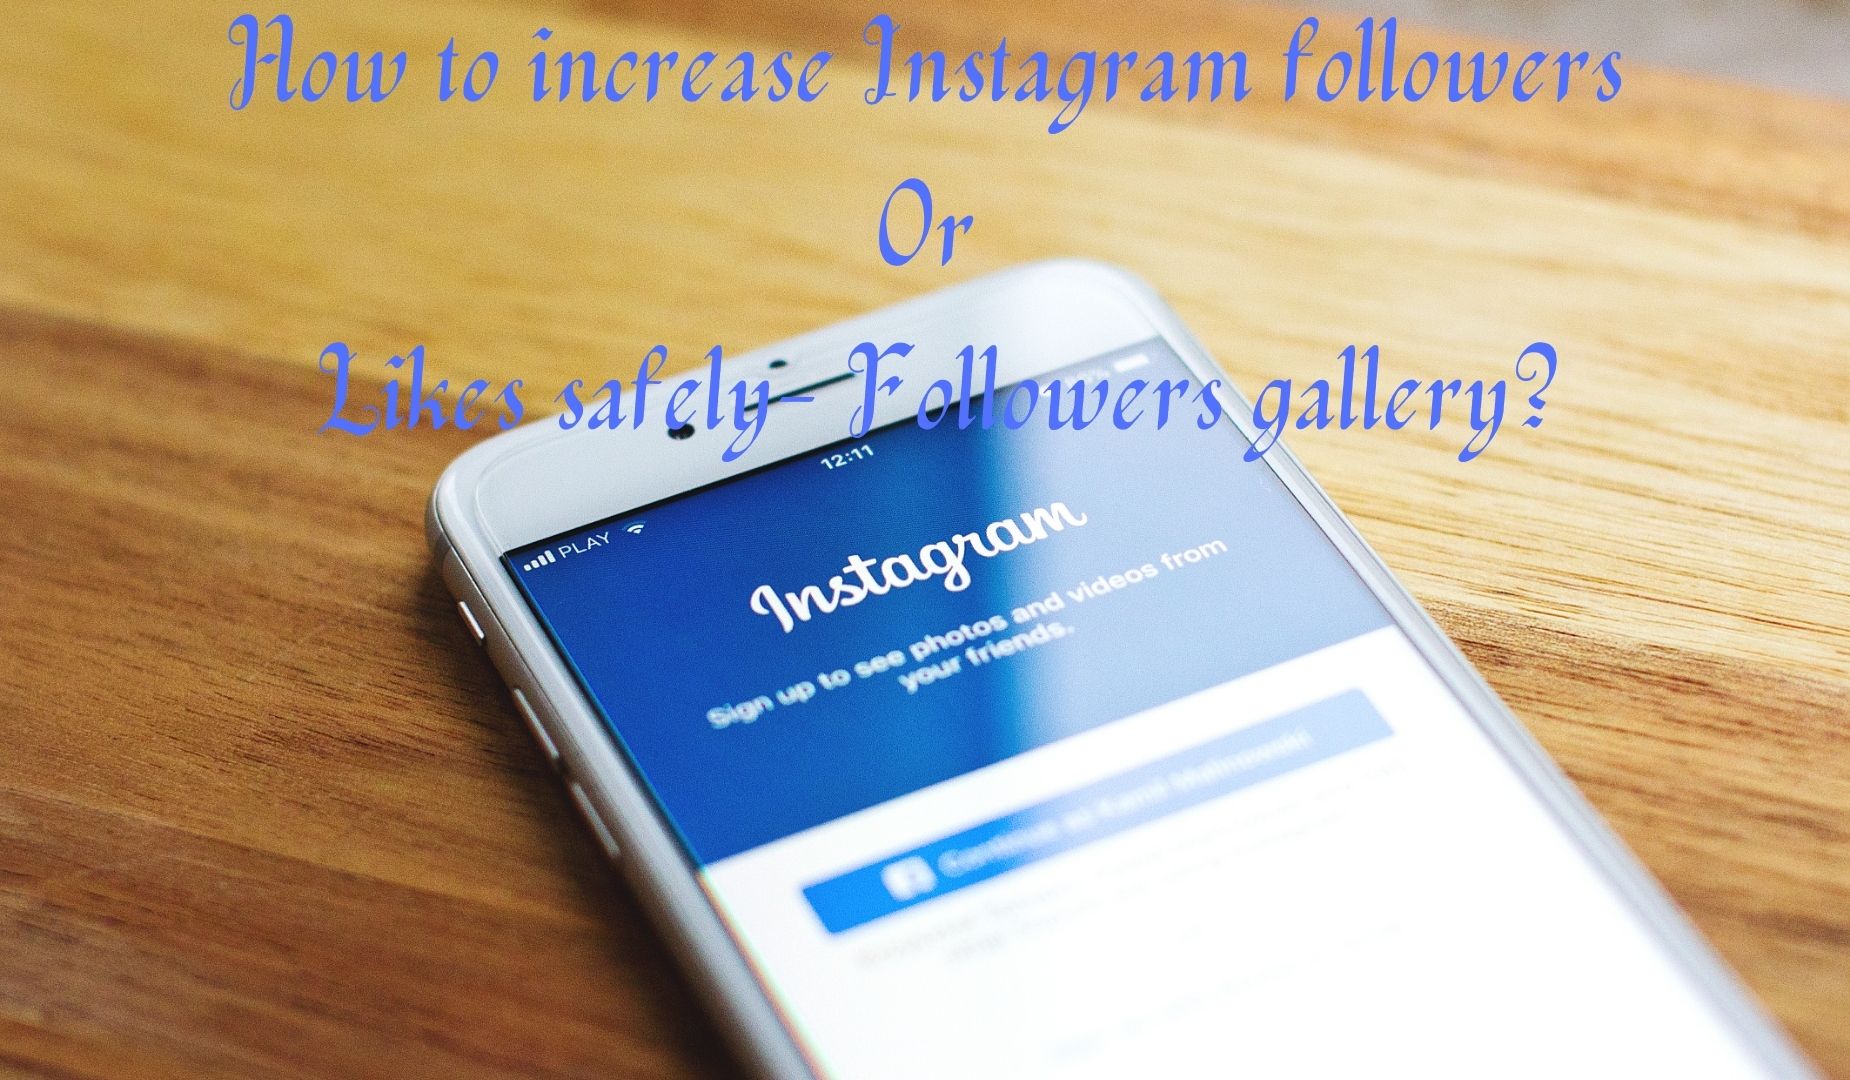 How to increase Instagram followers or likes safely- Followers gallery?